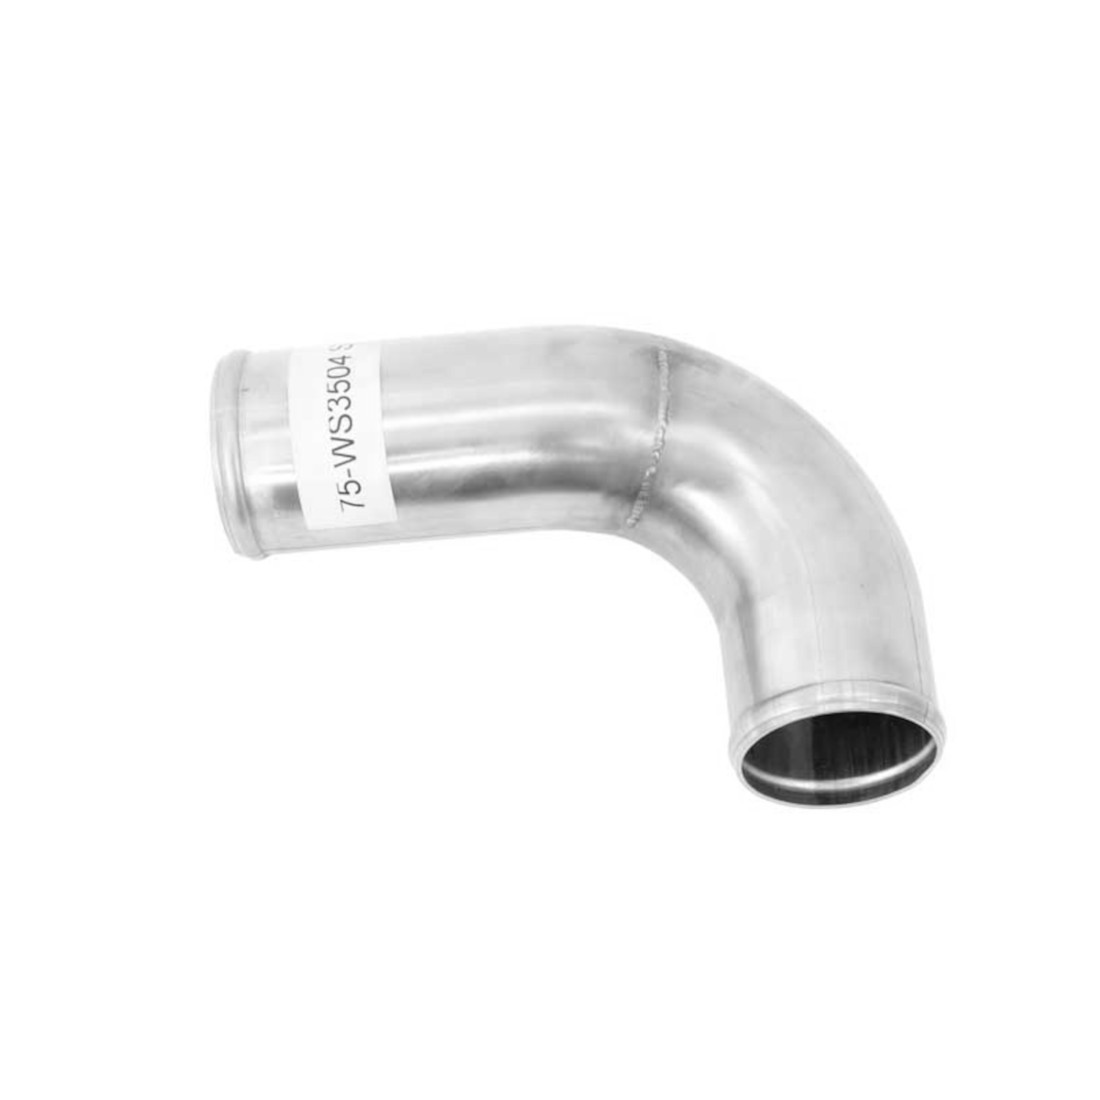 Western Star Detroit Sixty Series Engine Stainless Steel Lower Coolant Tube.